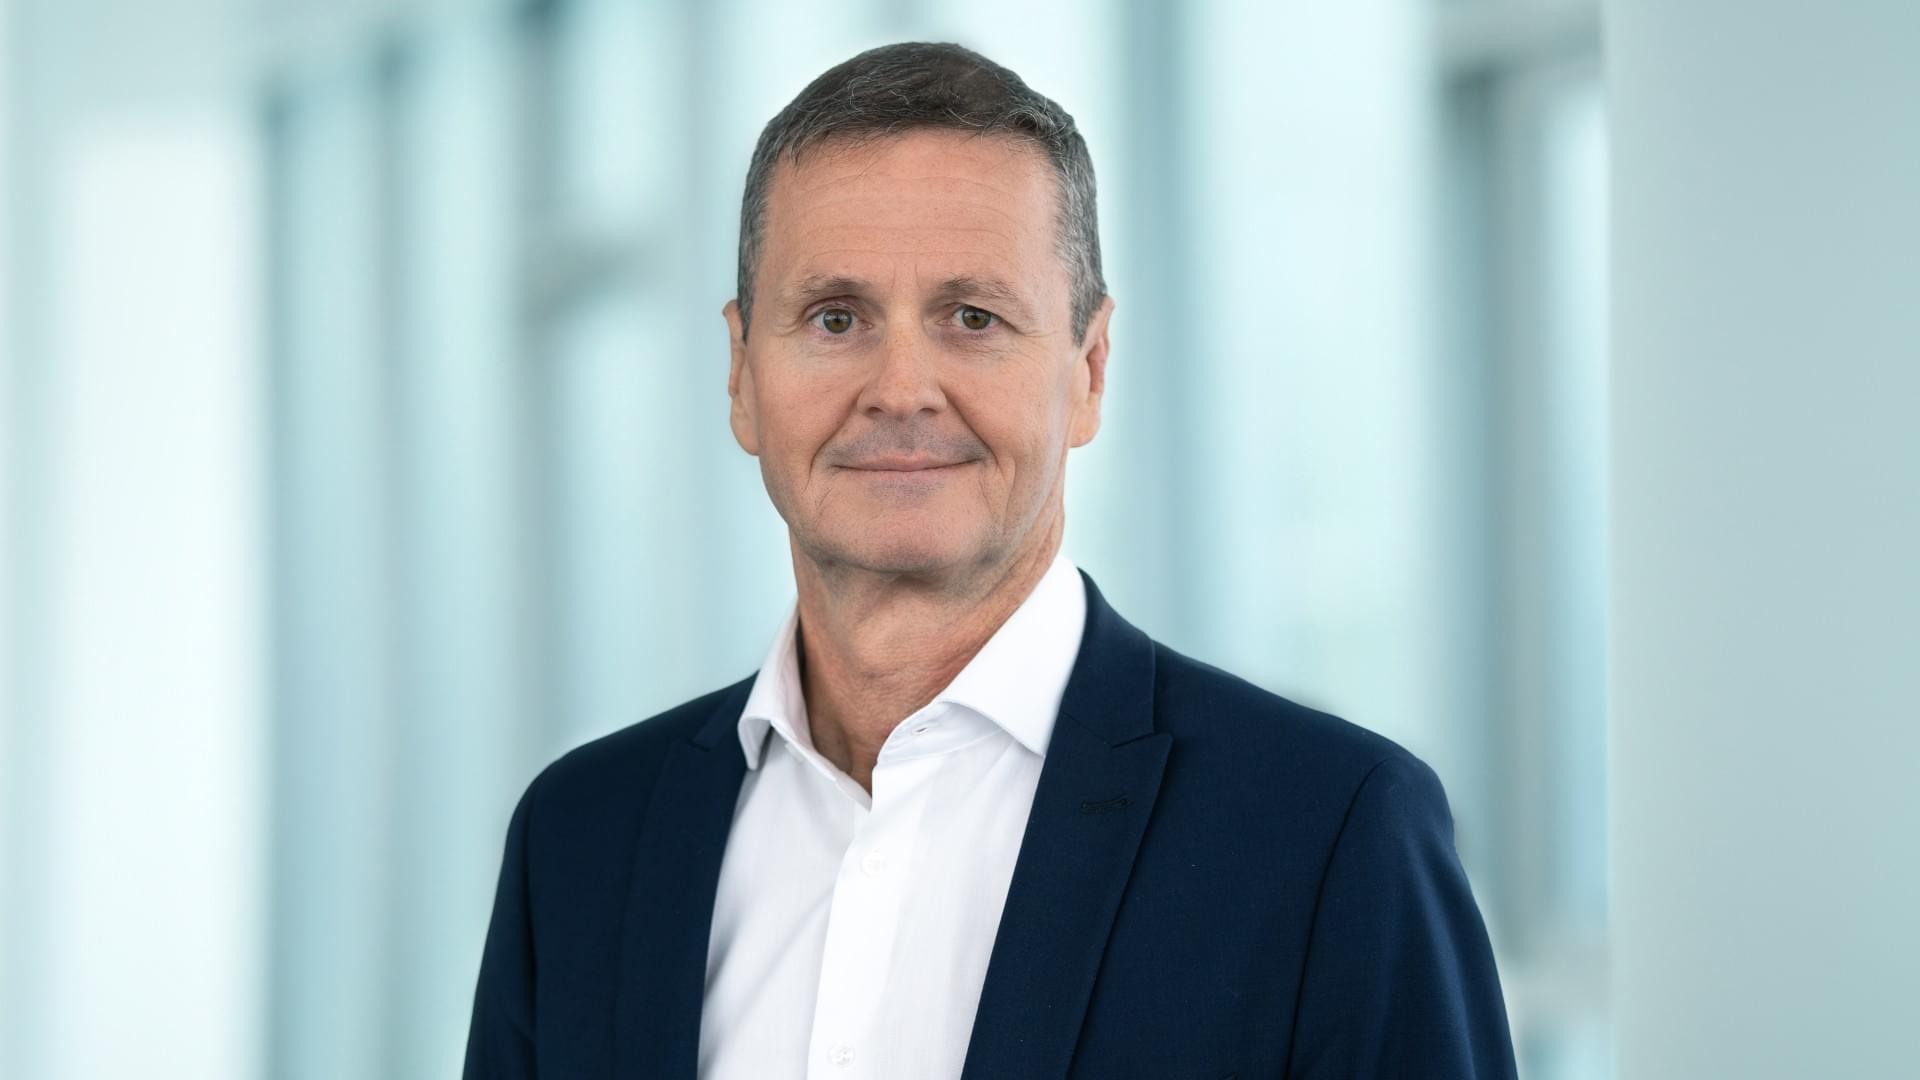 Portrait of Frank Markus Weber, Member of the Executive Board of Knorr-Bremse AG with worldwide responsibility for Finance, Accounting, Controlling, Taxes, Treasury, M&A, Sustainability, and Investor Relations